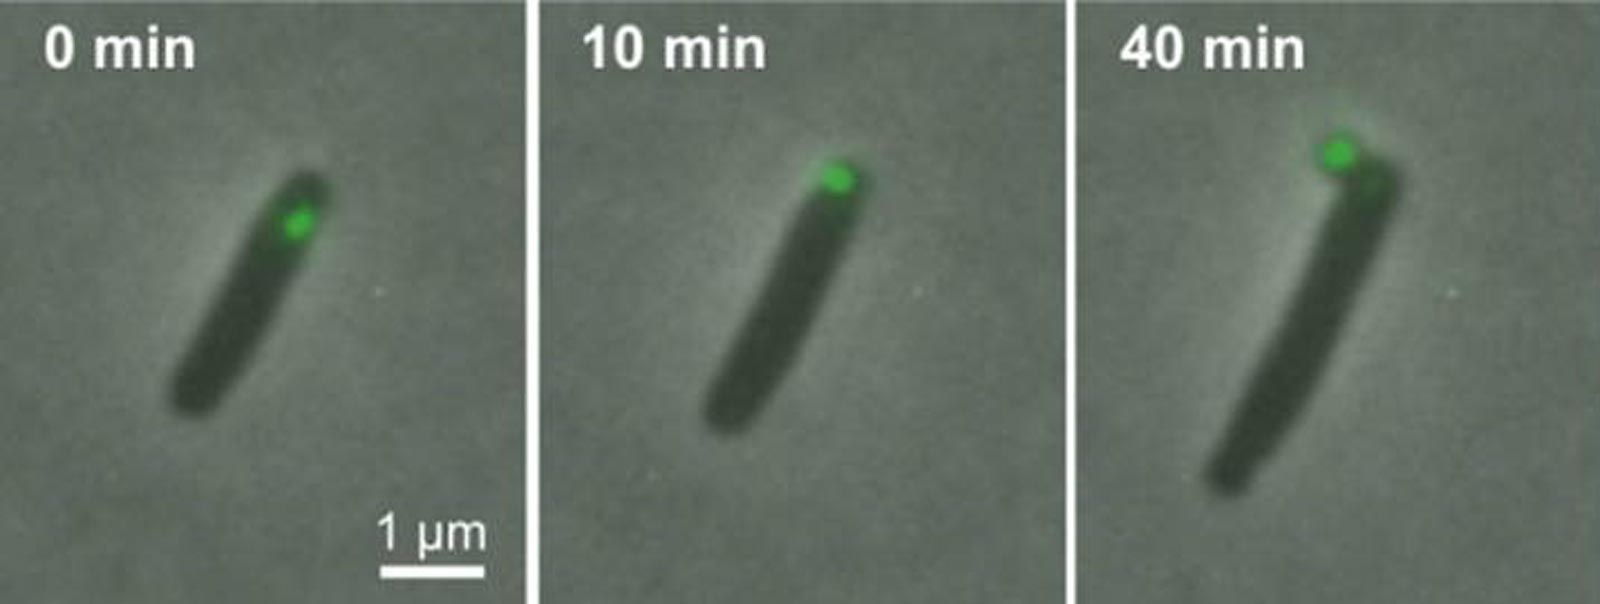 series of images showing a time-lapse of a cell ejecting a green fluorescent minicell away from the main cell body